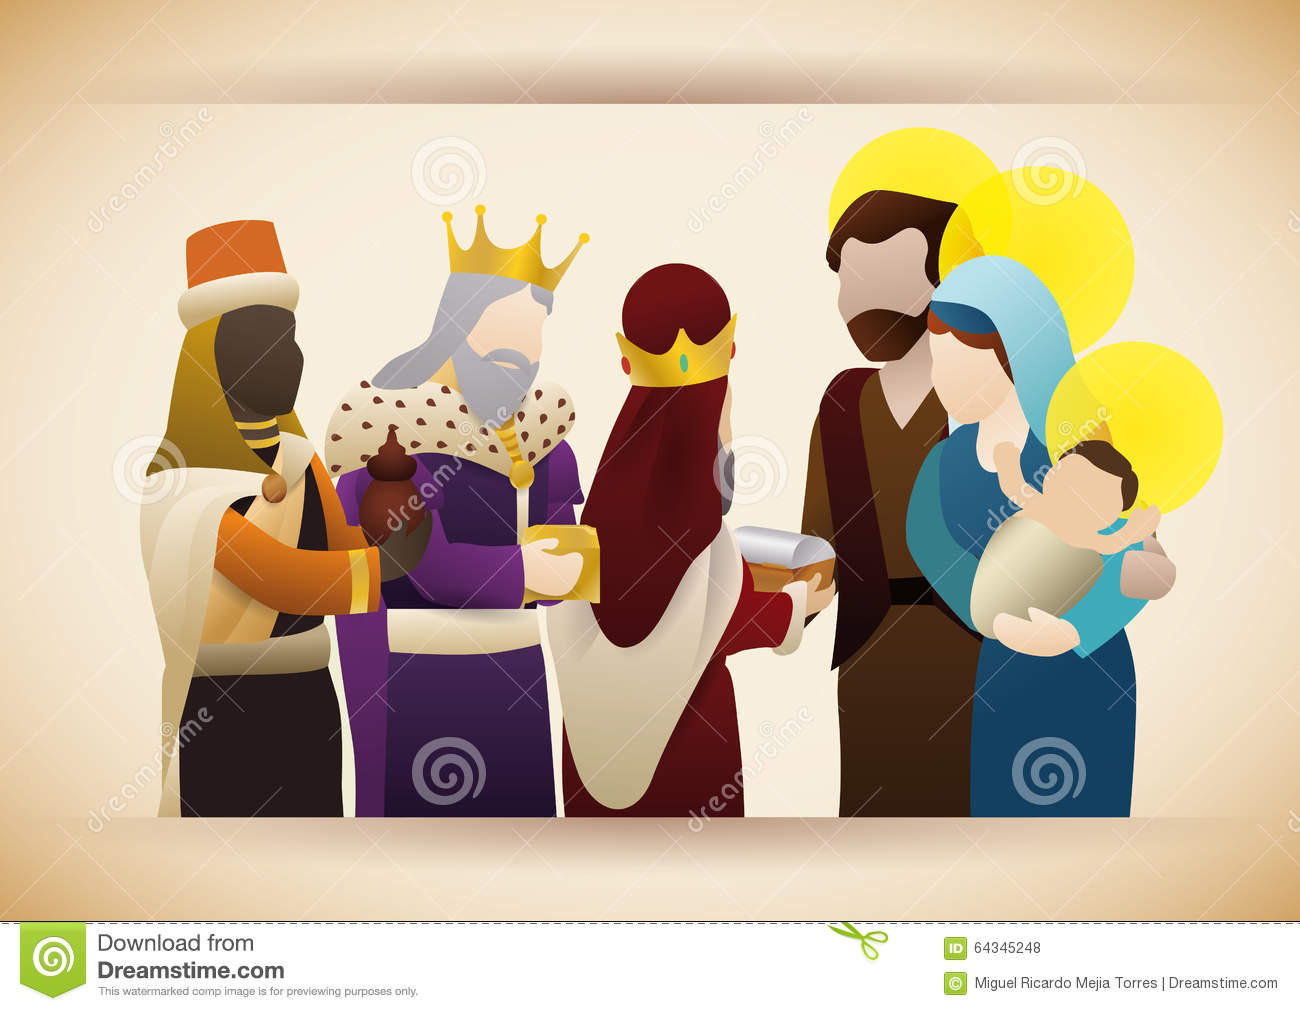 3 Gifts To Baby Jesus
 The Three Wise Men With Gifts Visit The Baby Jesus Vector